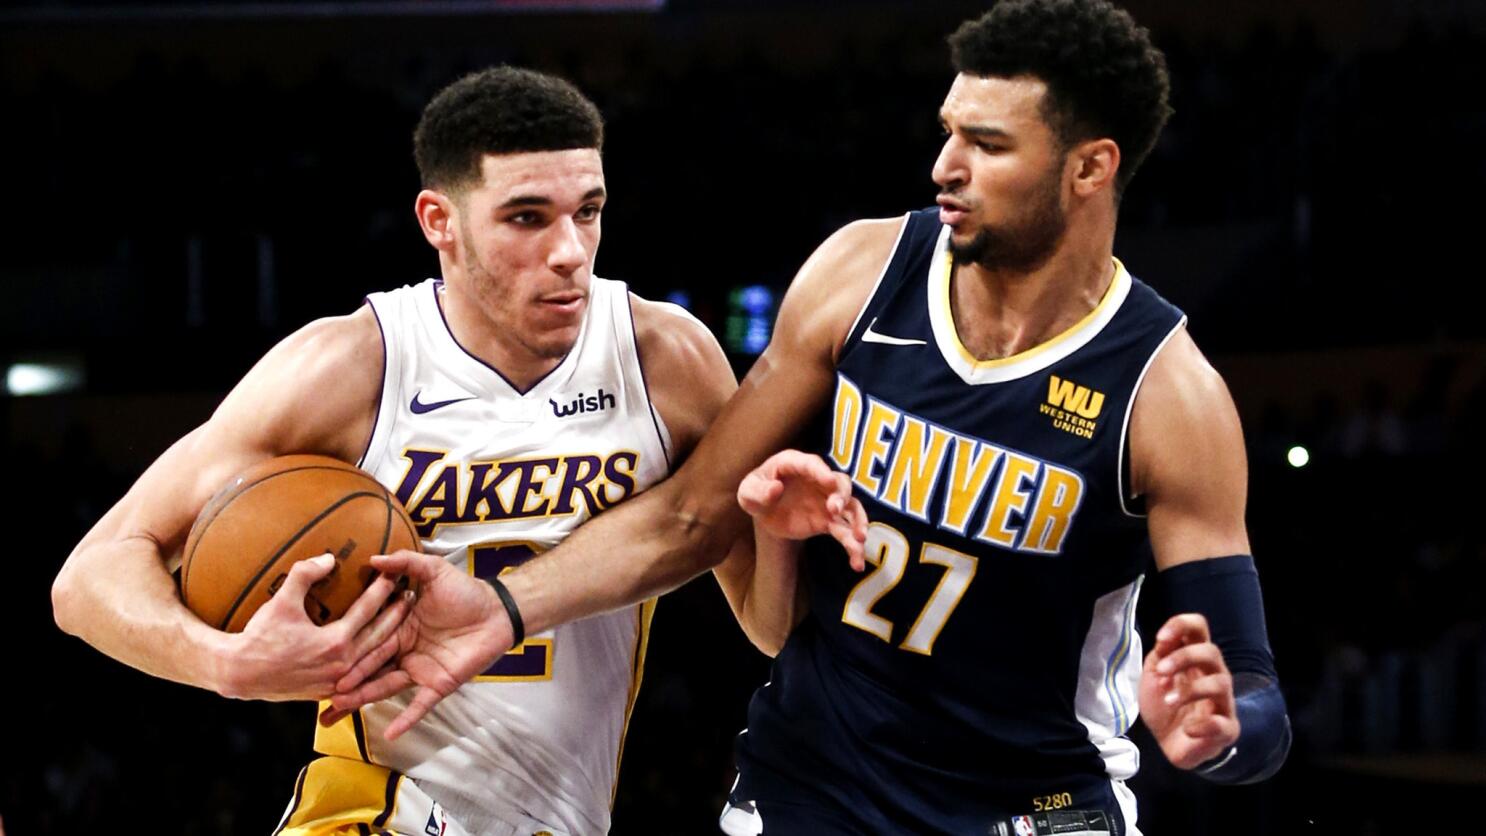 Los Angeles Lakers will go on a big run once Lonzo Ball returns